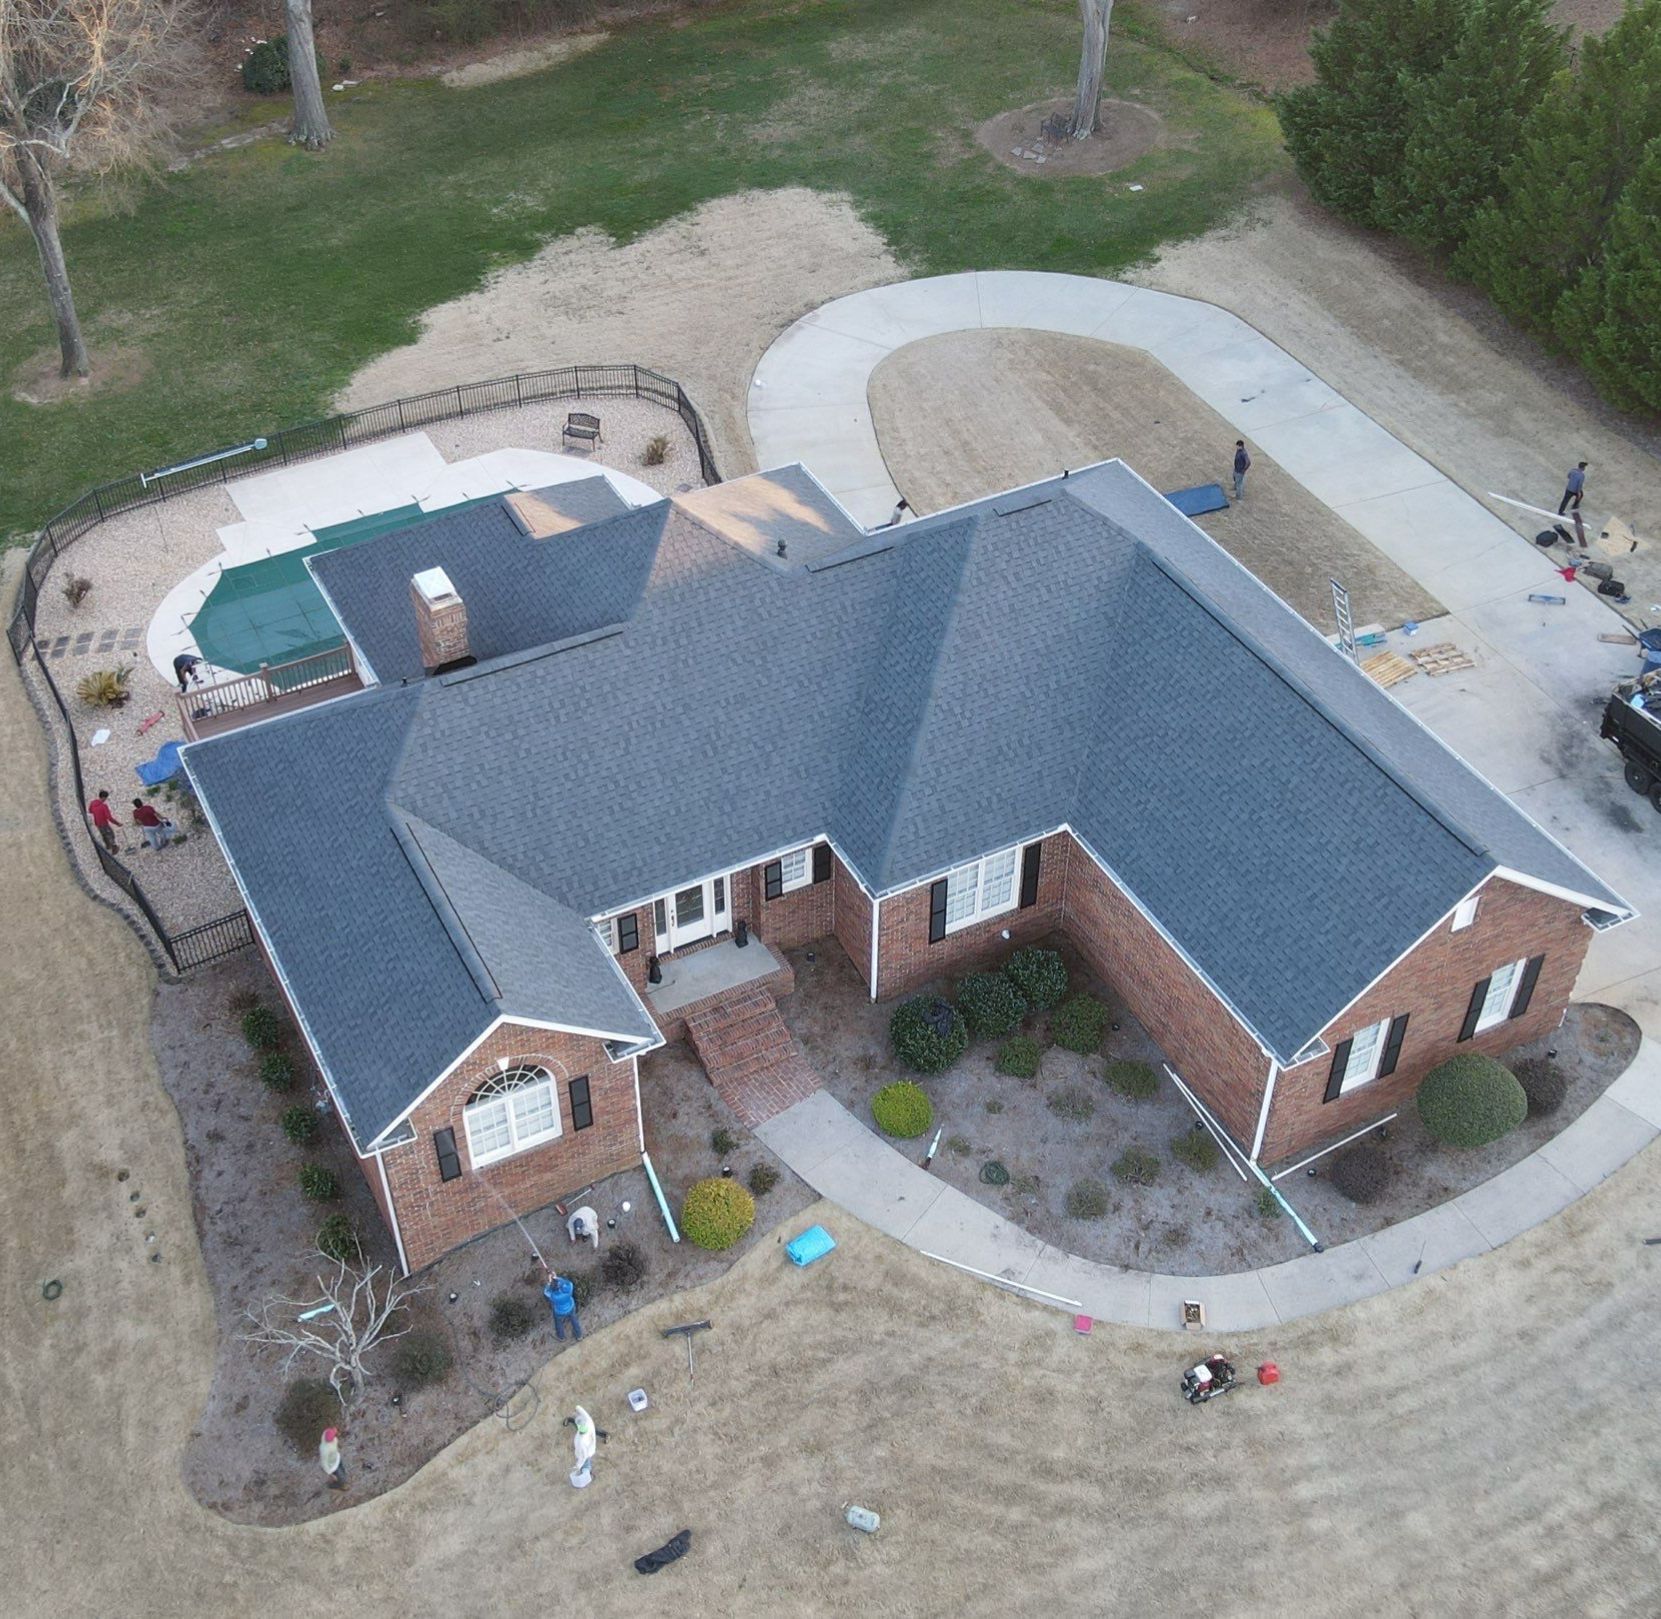 An aerial view of a brick house with a blue roof